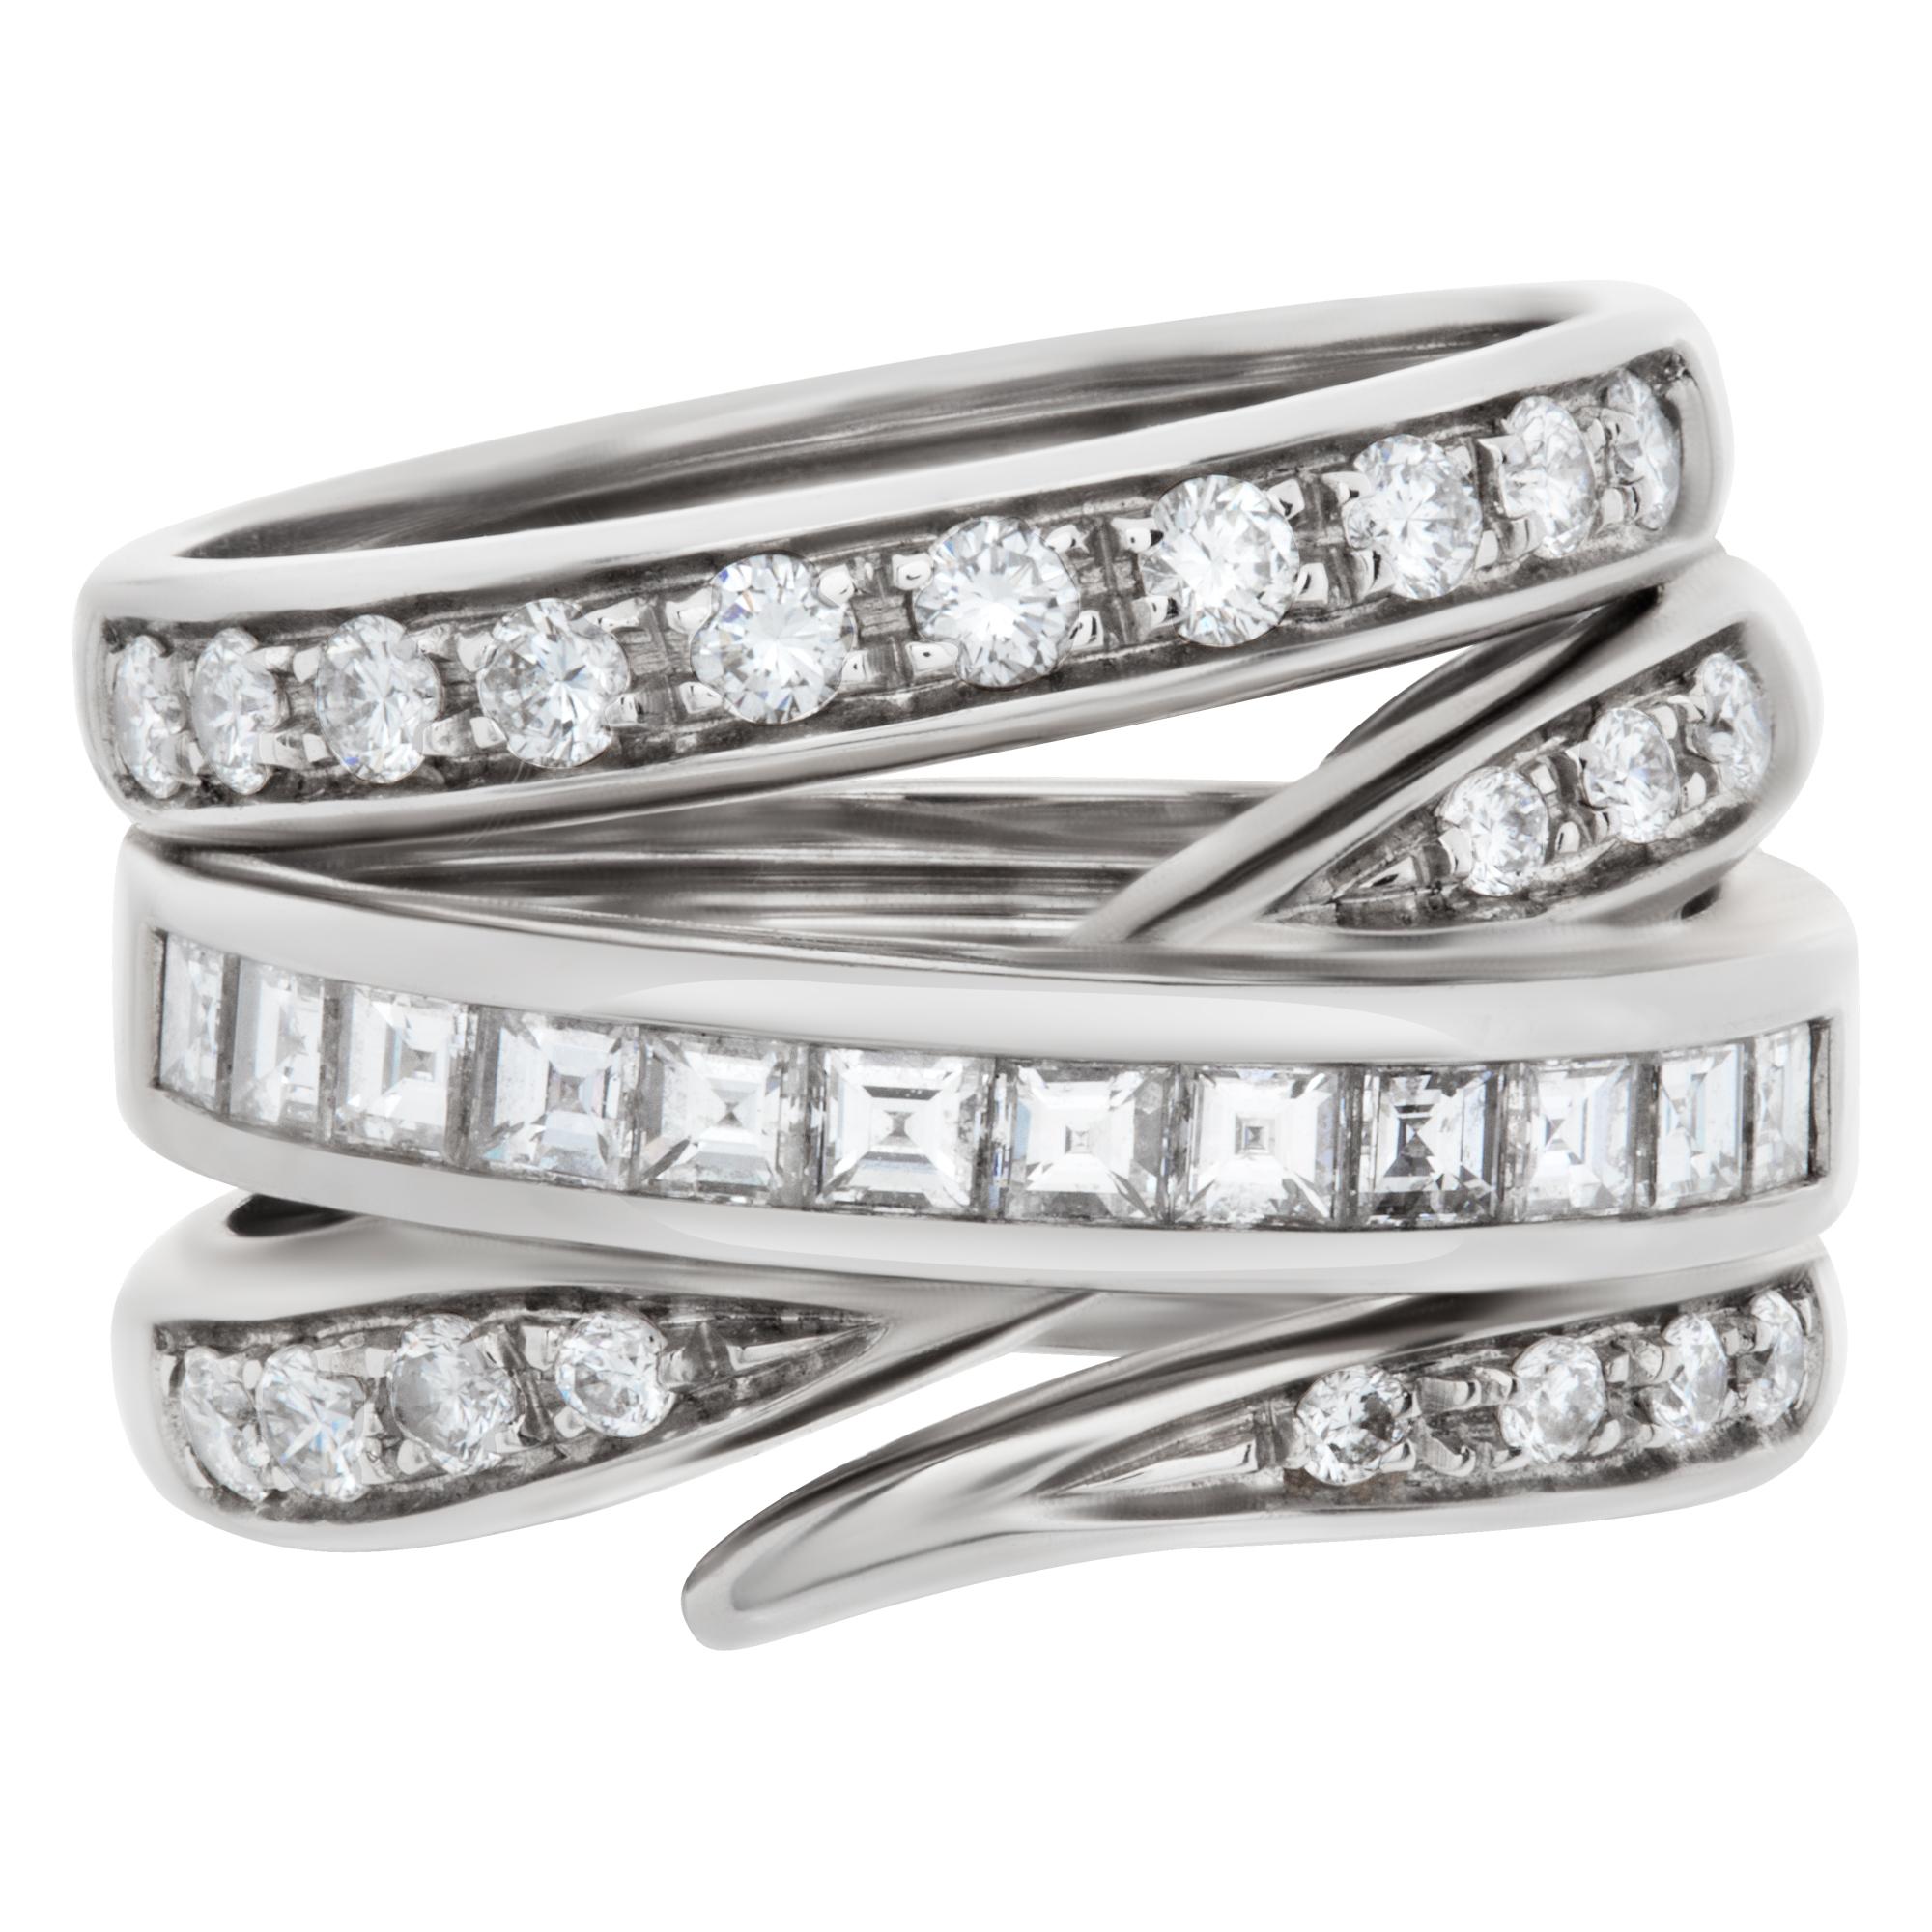 Crossover baguette & round diamond ring in 18k white gold with app. 2.10 carats. Size 6.5This ring is currently size 6.5 and some items can be sized up or down, please ask! It weighs 8.2 gramms and is 18k White Gold.
